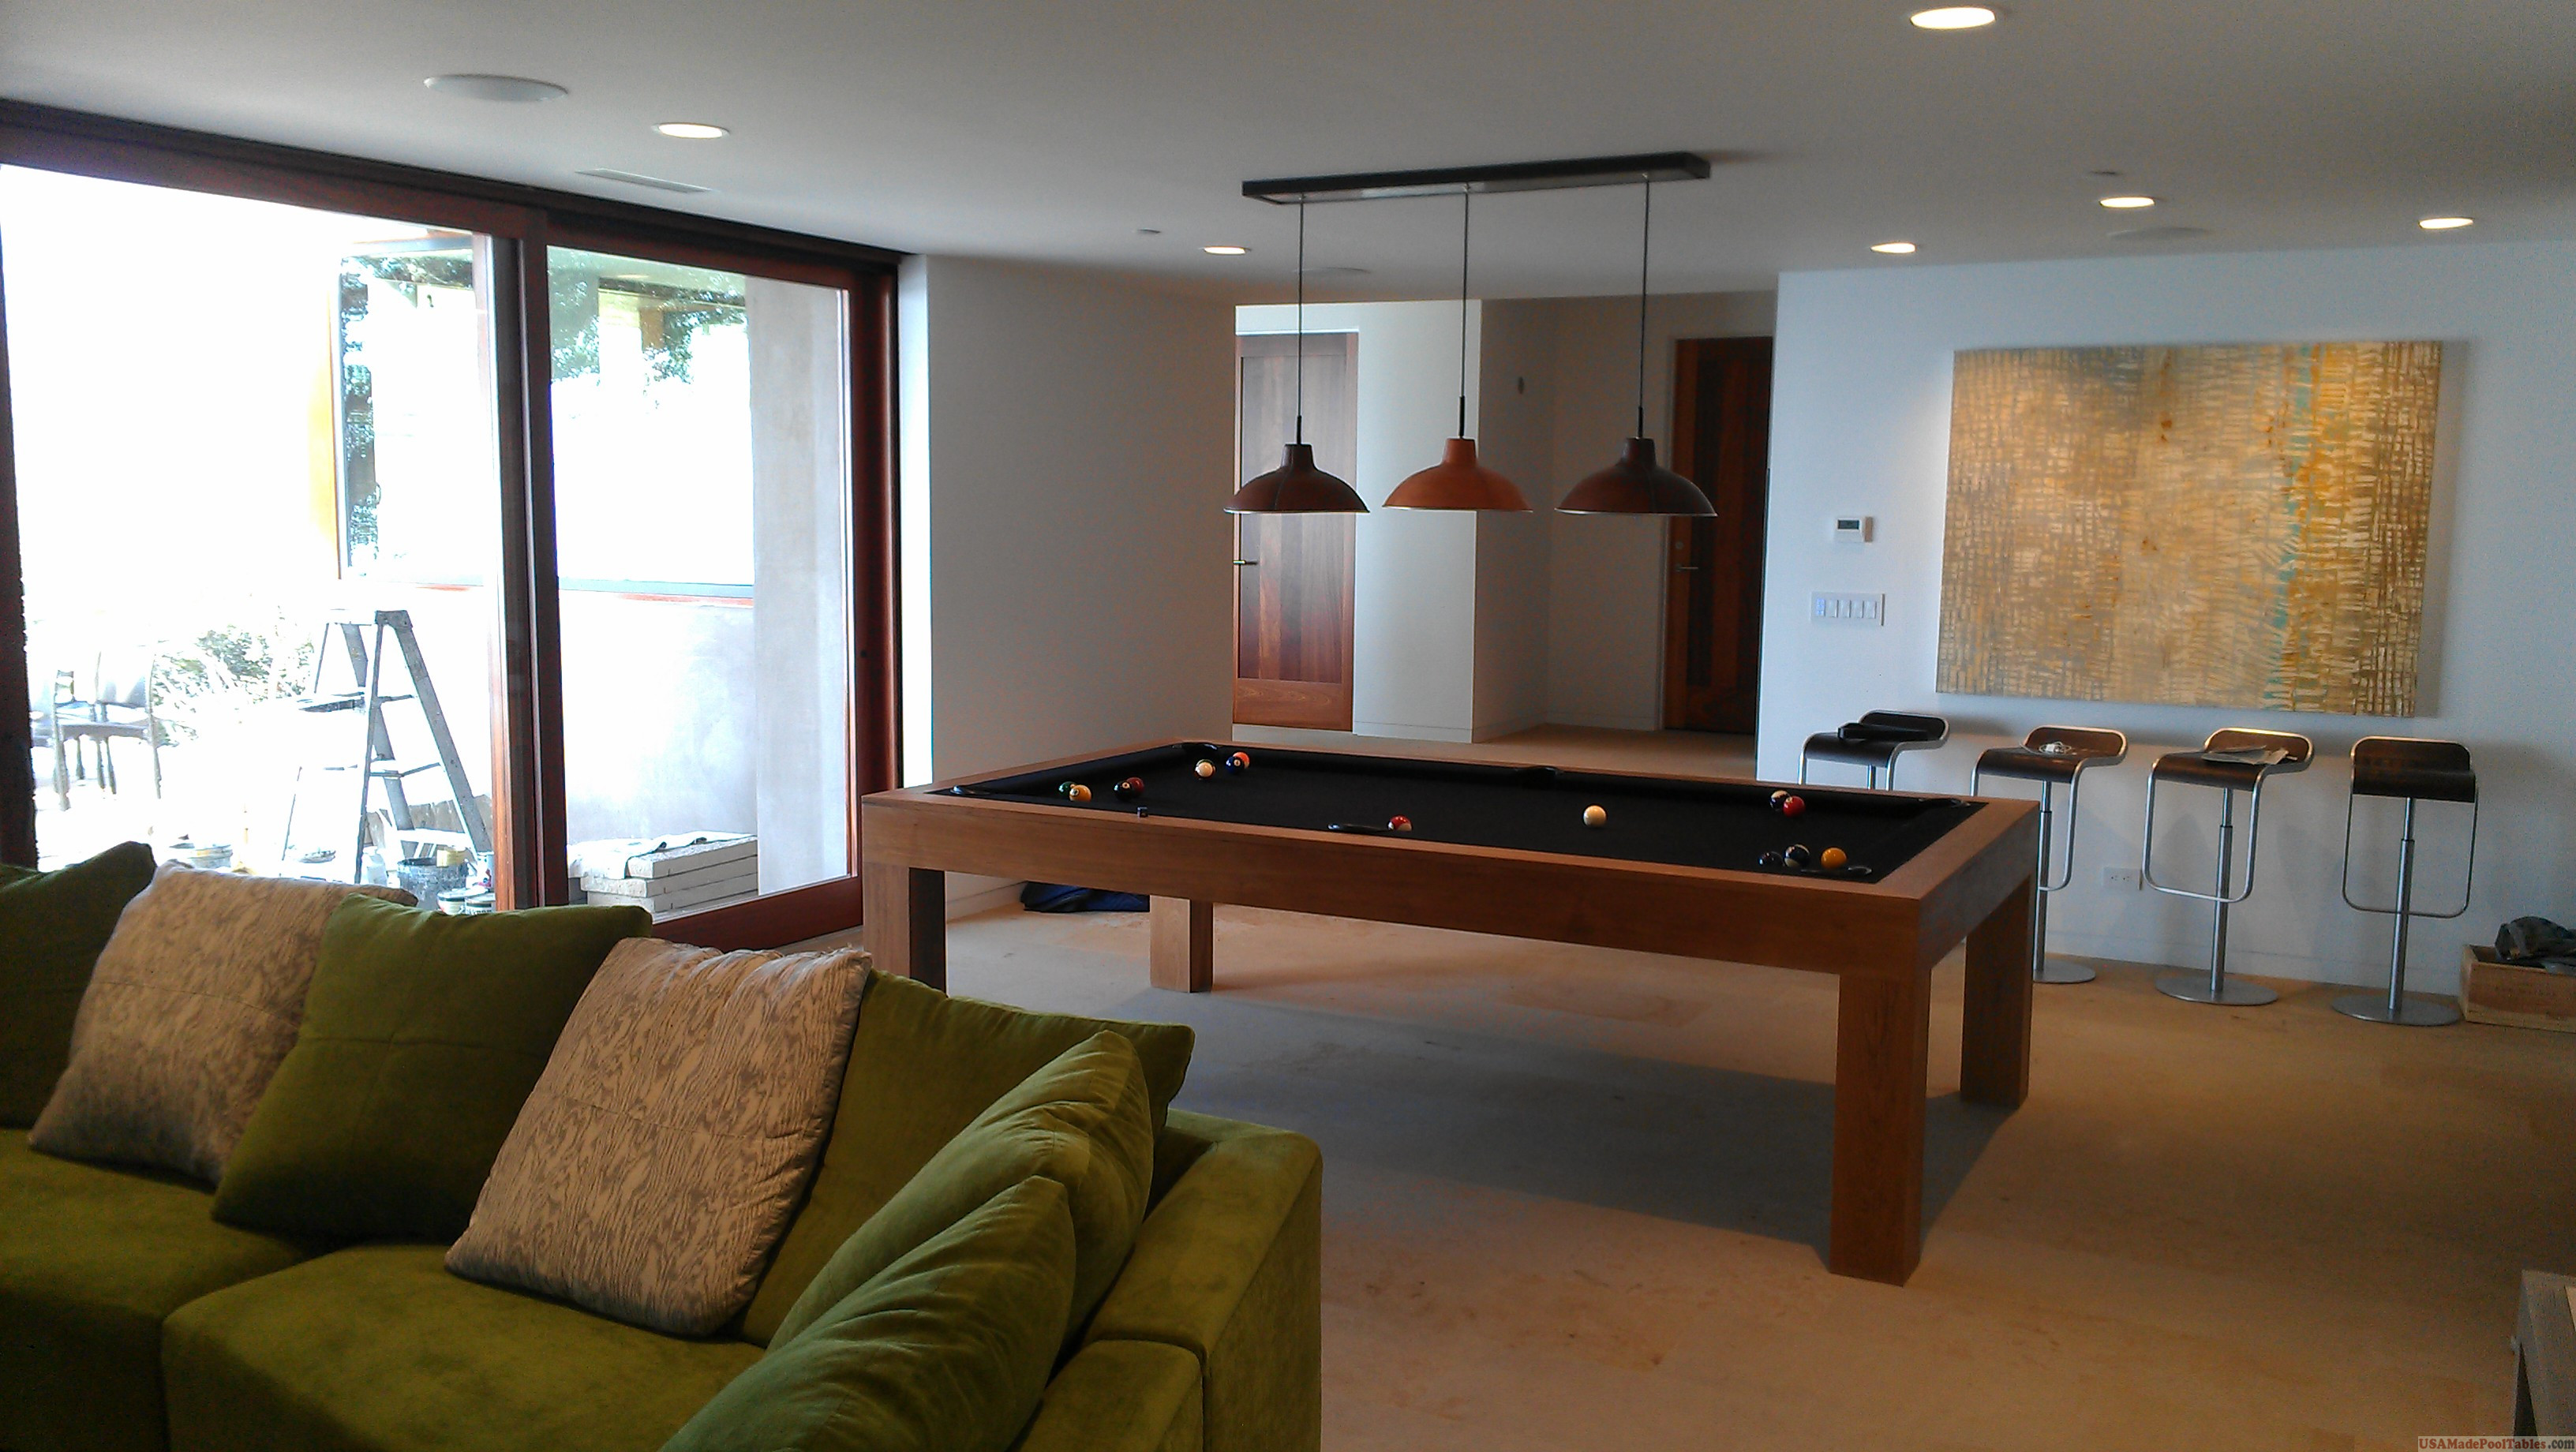 Riviera Contemporary Pool Table Contemporary Pool Tables Modern